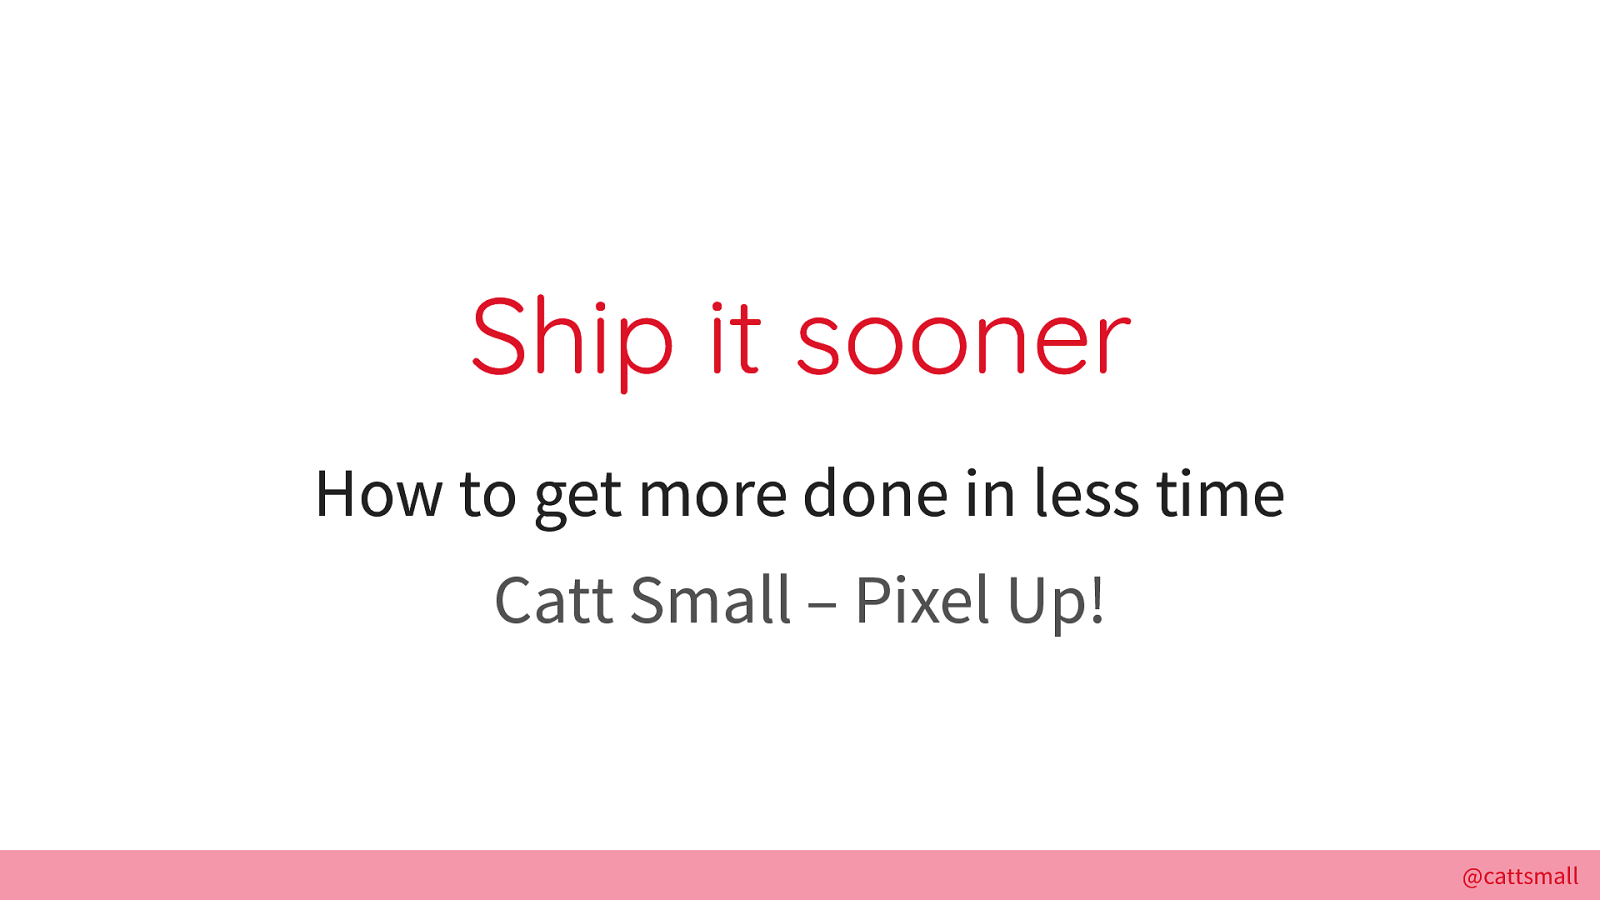 Ship it Sooner: How to get more done in less time